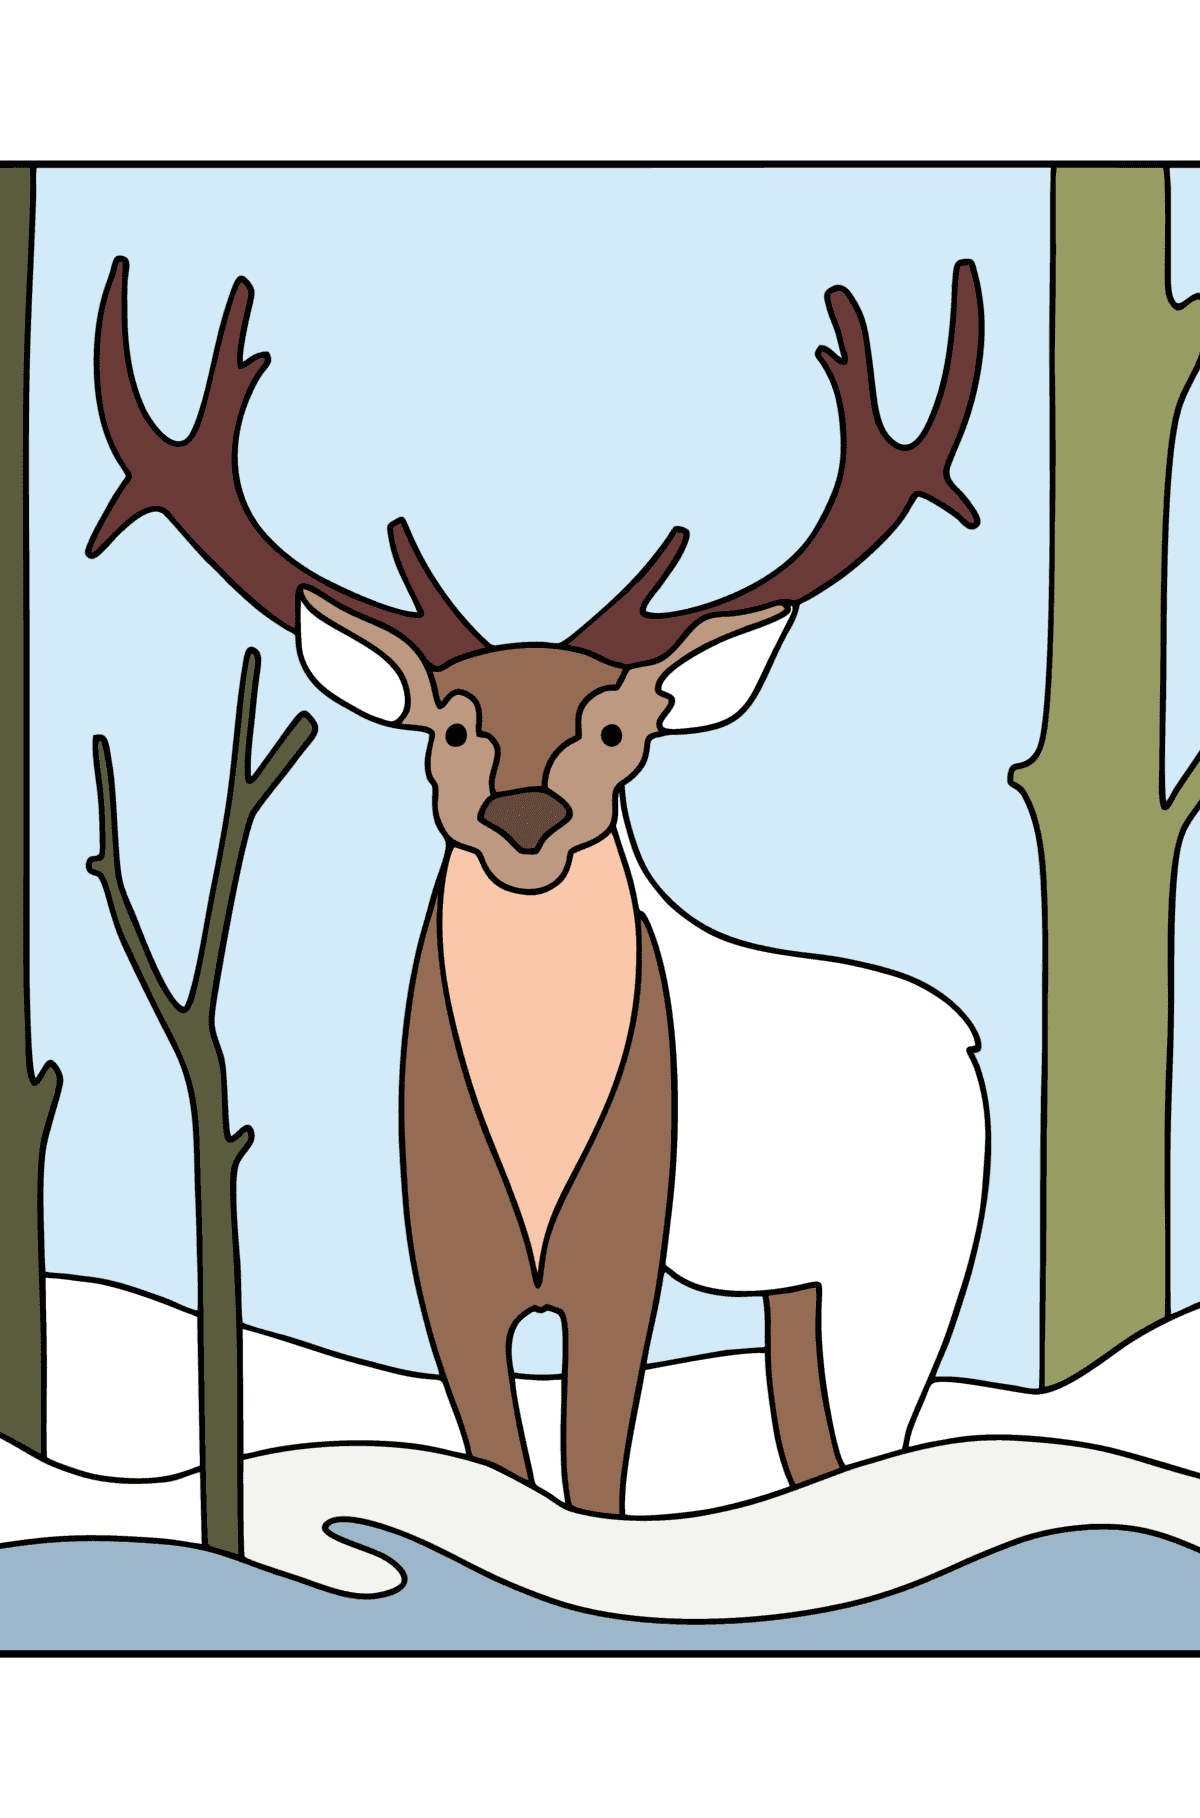 Deer in the winter forest сoloring page - Coloring Pages for Kids